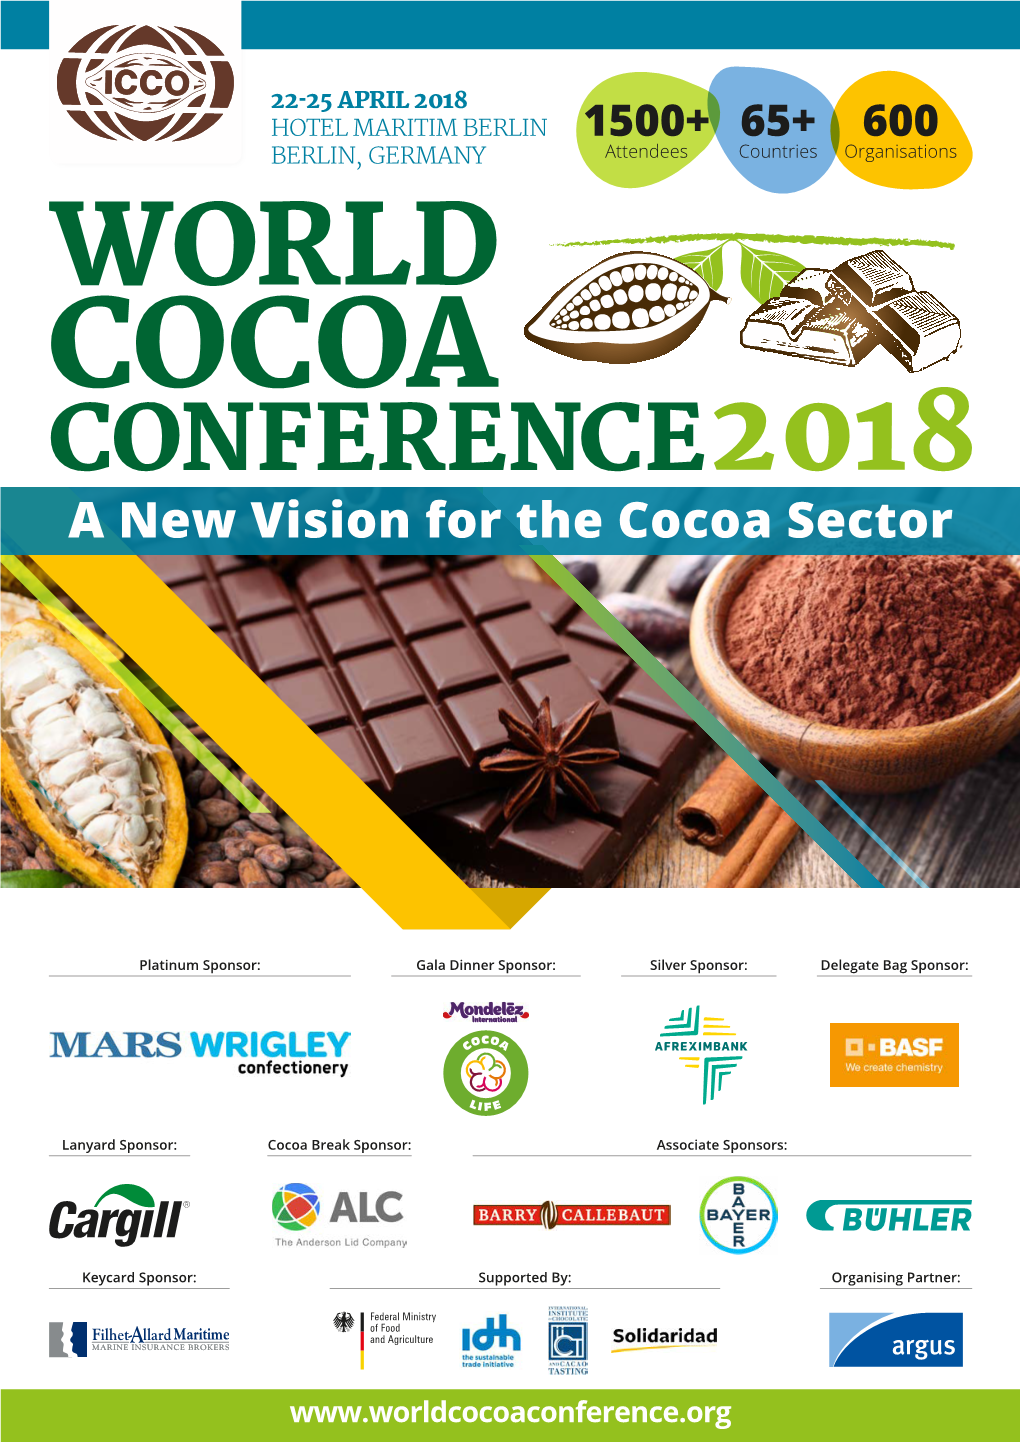 A New Vision for the Cocoa Sector